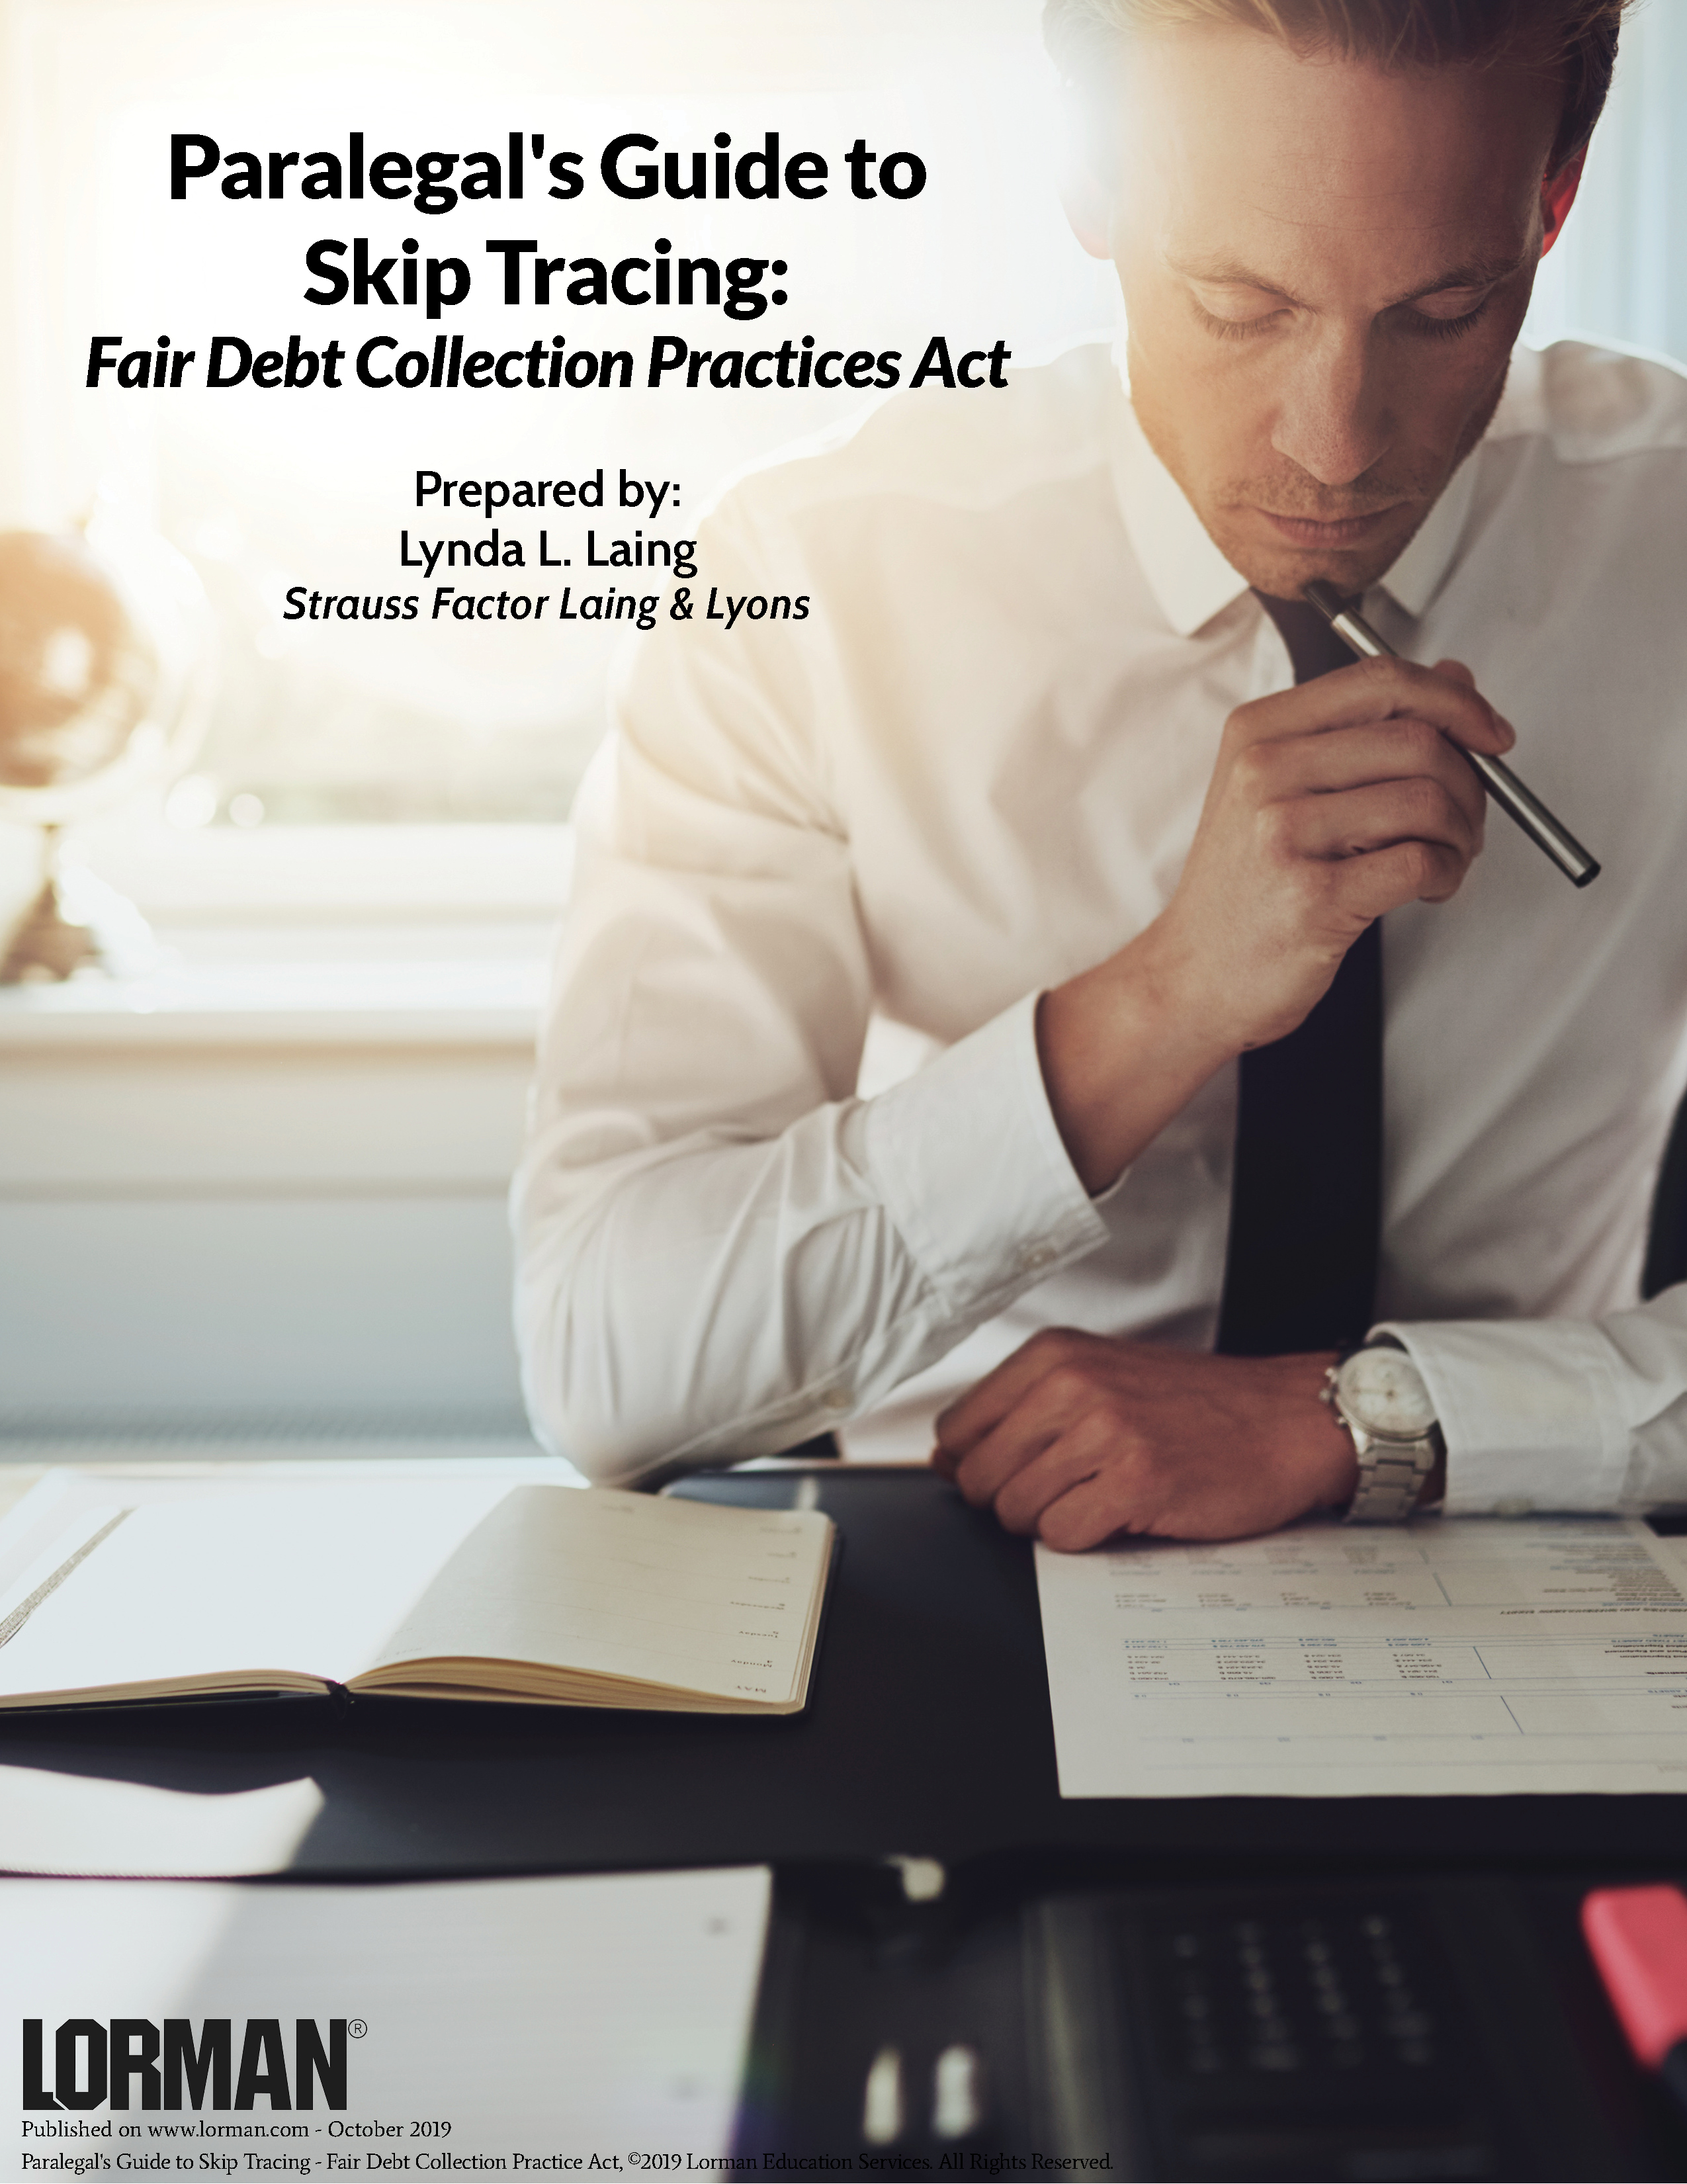 Paralegal's Guide to Skip Tracing - Fair Debt Collection Practice Act